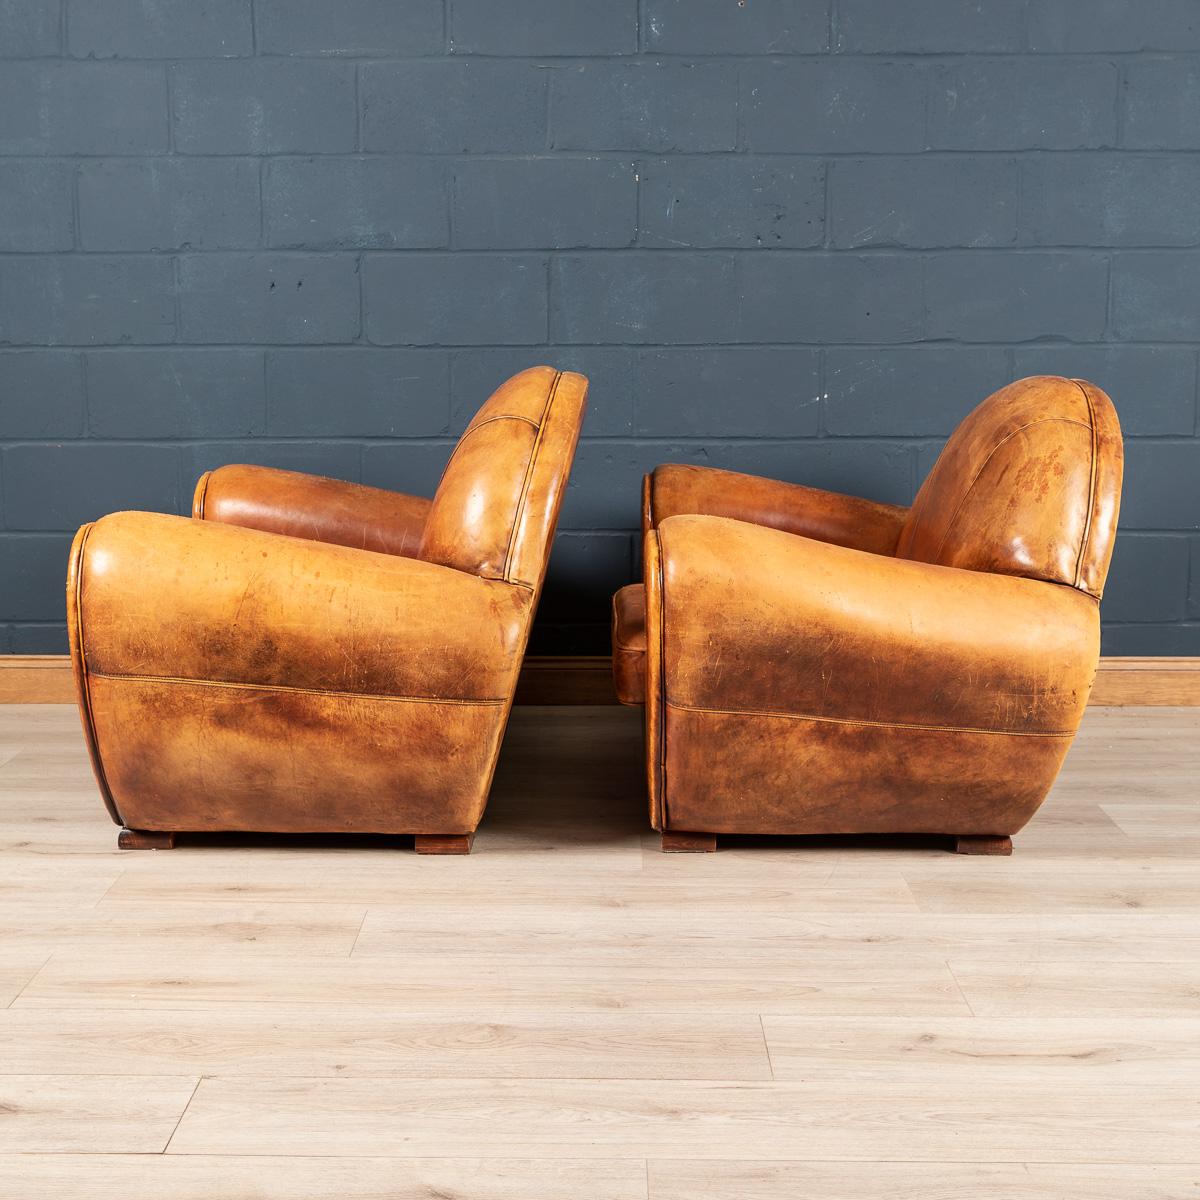 A lovely pair of sheepskin leather armchairs dating to the latter part of the 20th century, this wonderful pair of club chairs were hand upholstered in sheepskin leather in Holland by the finest craftsmen. An unusual Art Deco style model, inspired